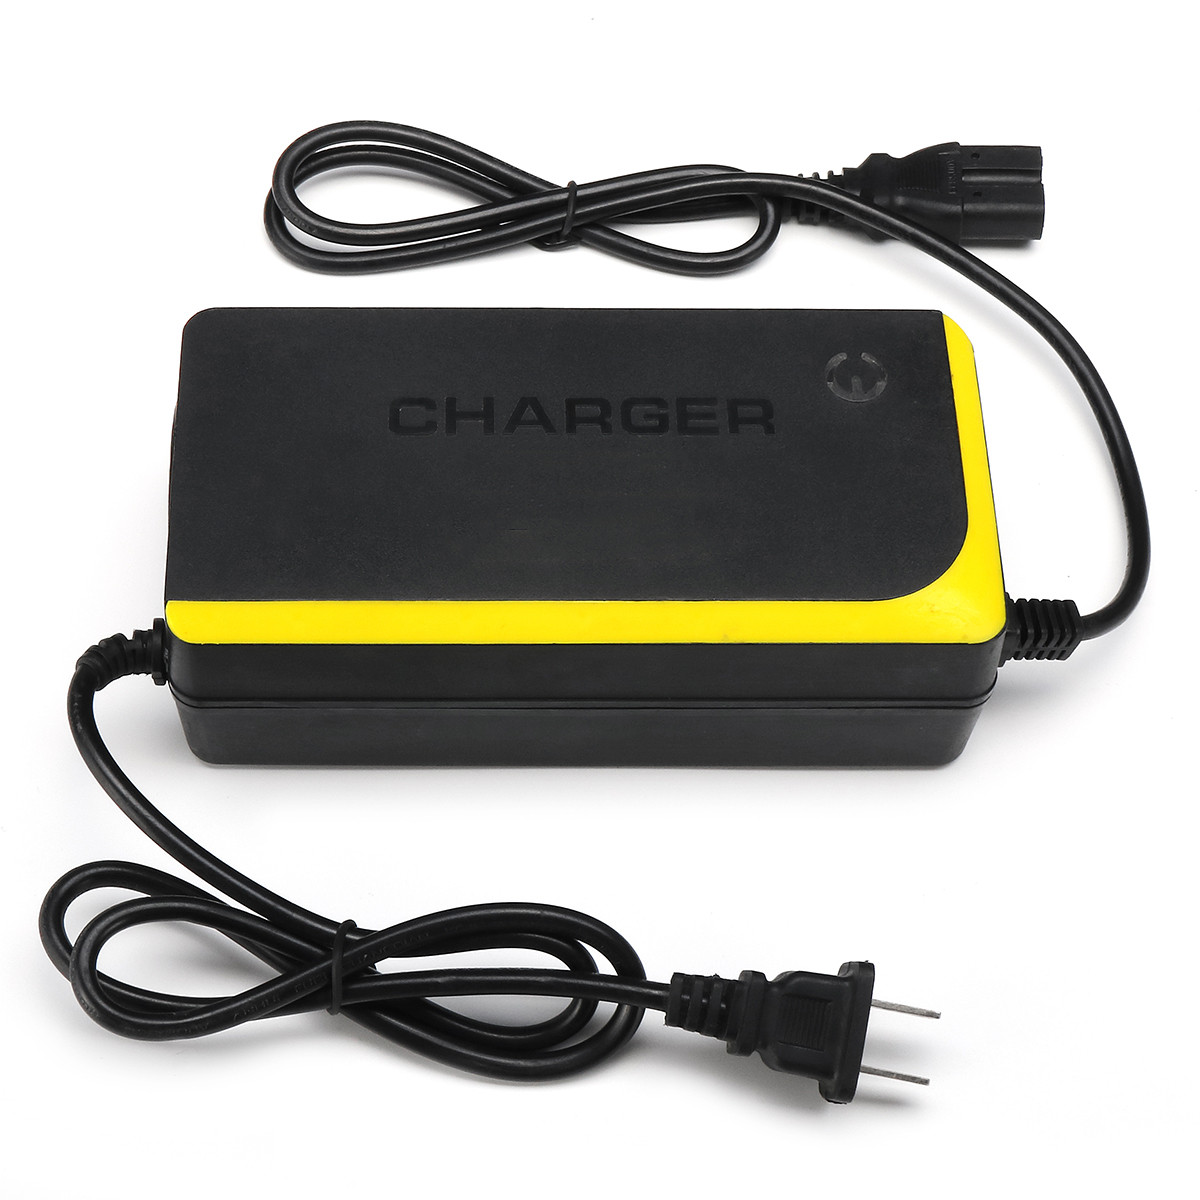 48V-12AH-Electric-Vehicle-Battery-Charger-Lead-Acid-Battery-Charger-Bicycle-Motorcycle-Charger-1400891-3